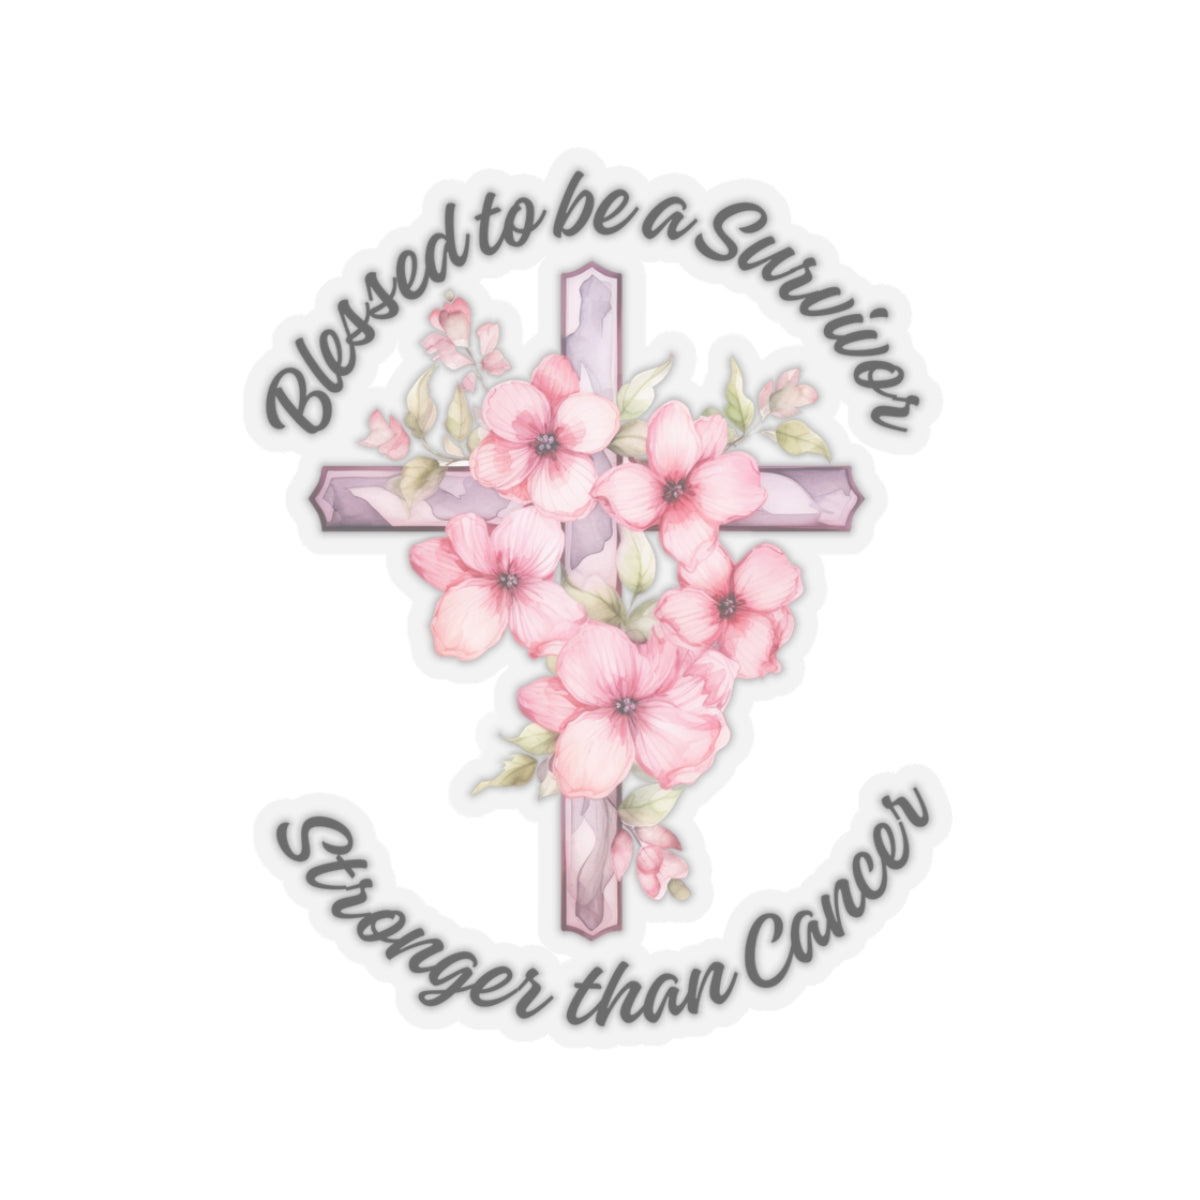 Blessed to Be A Survivor...Inspirational Quote Kiss-Cut Stickers-Paper products-3" × 3"-Transparent-mysticalcherry